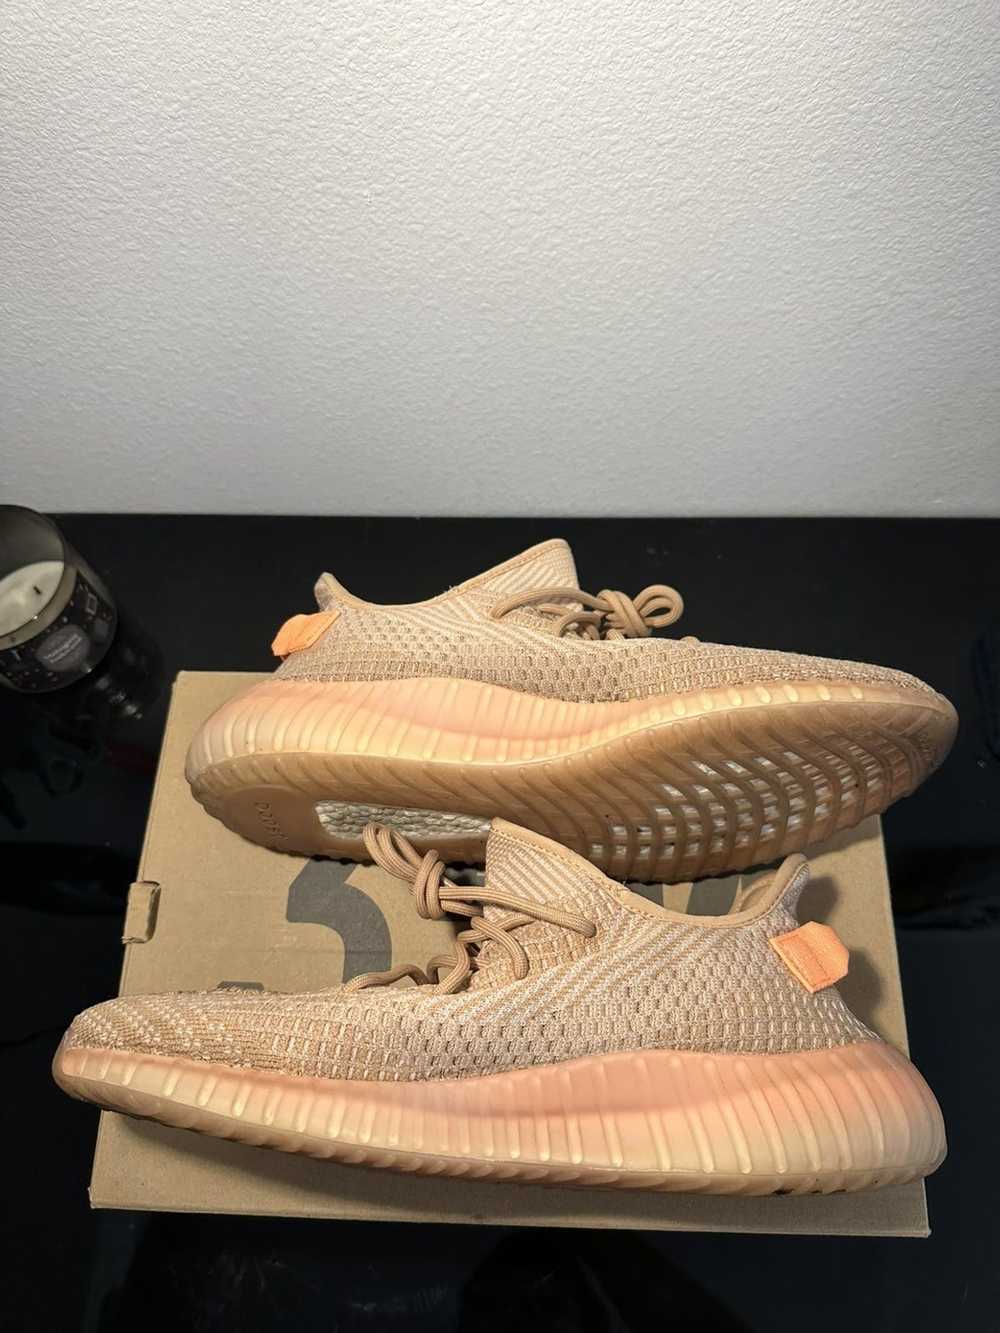 Adidas Yeezy boost 350 clay size 13 - image 4